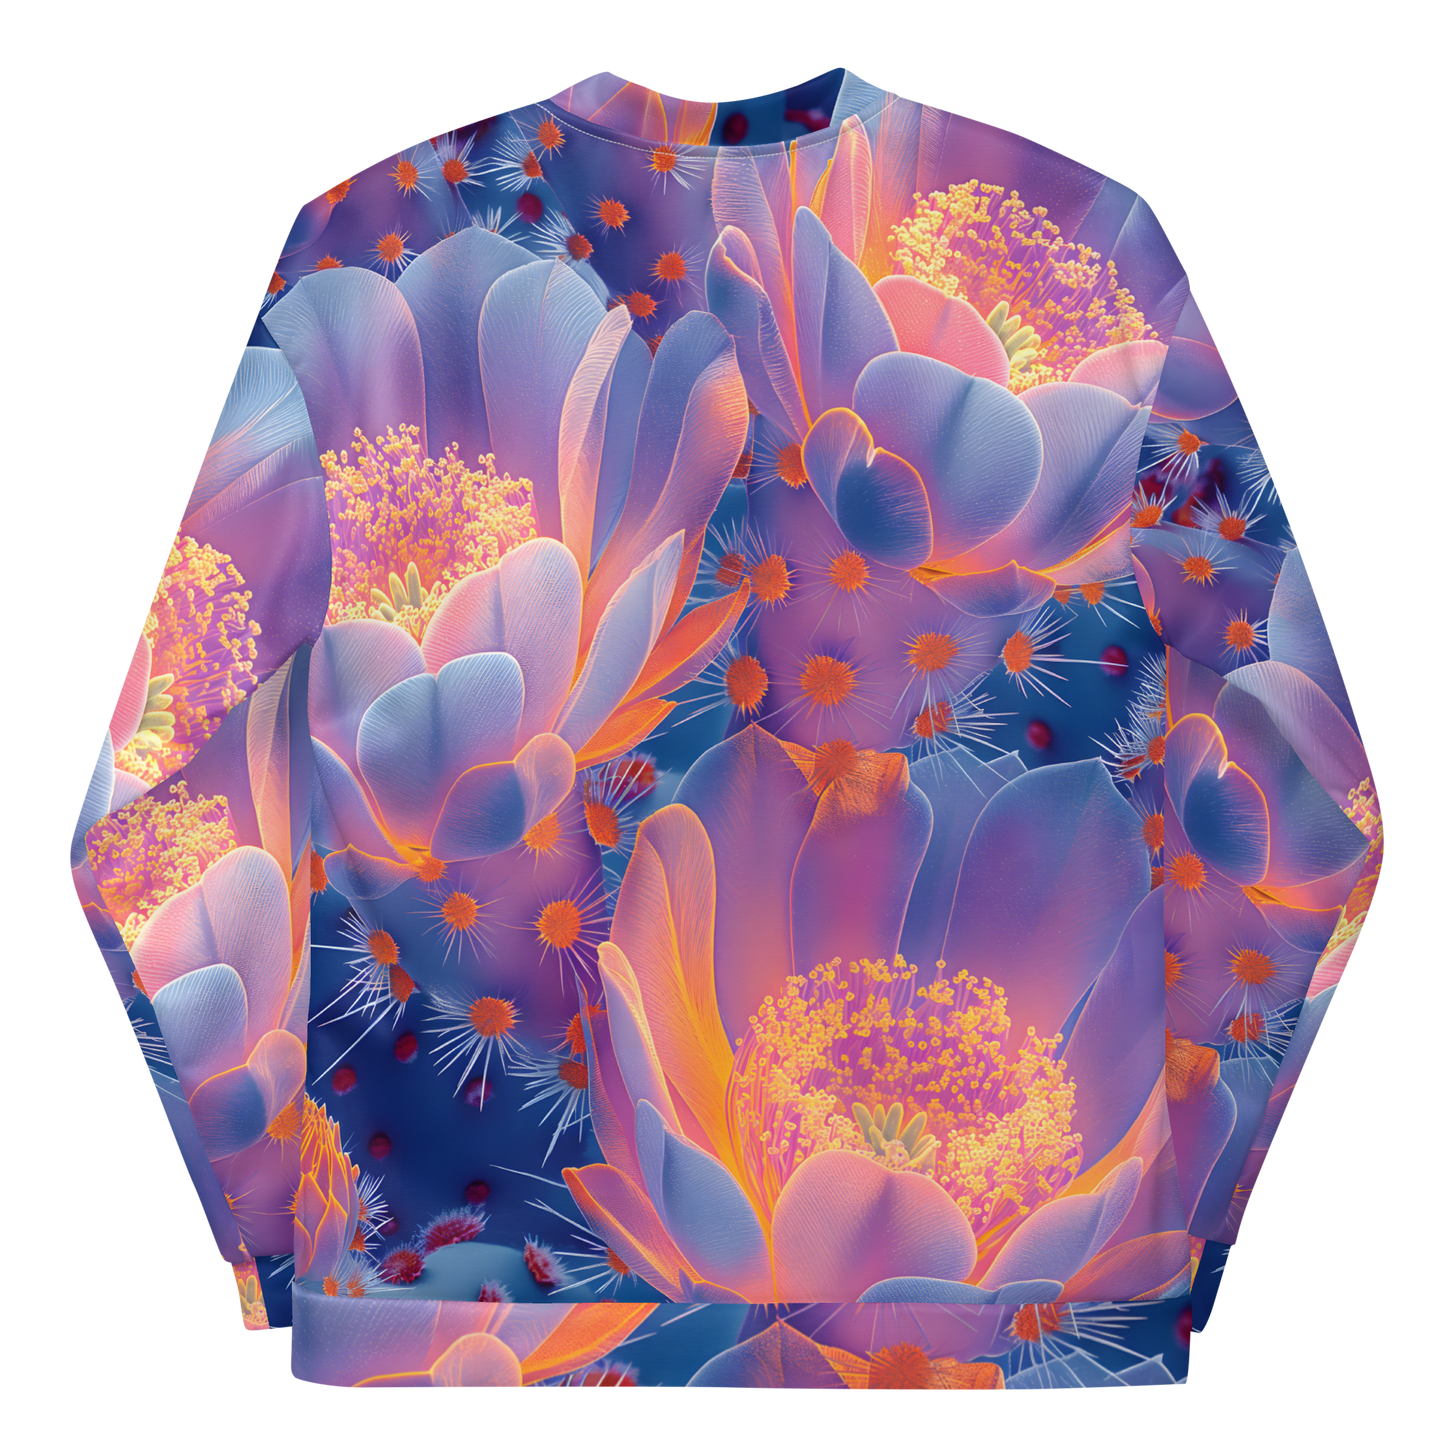 Cactus Glow Unisex Bomber Jacket - Psychedelic All Over Print